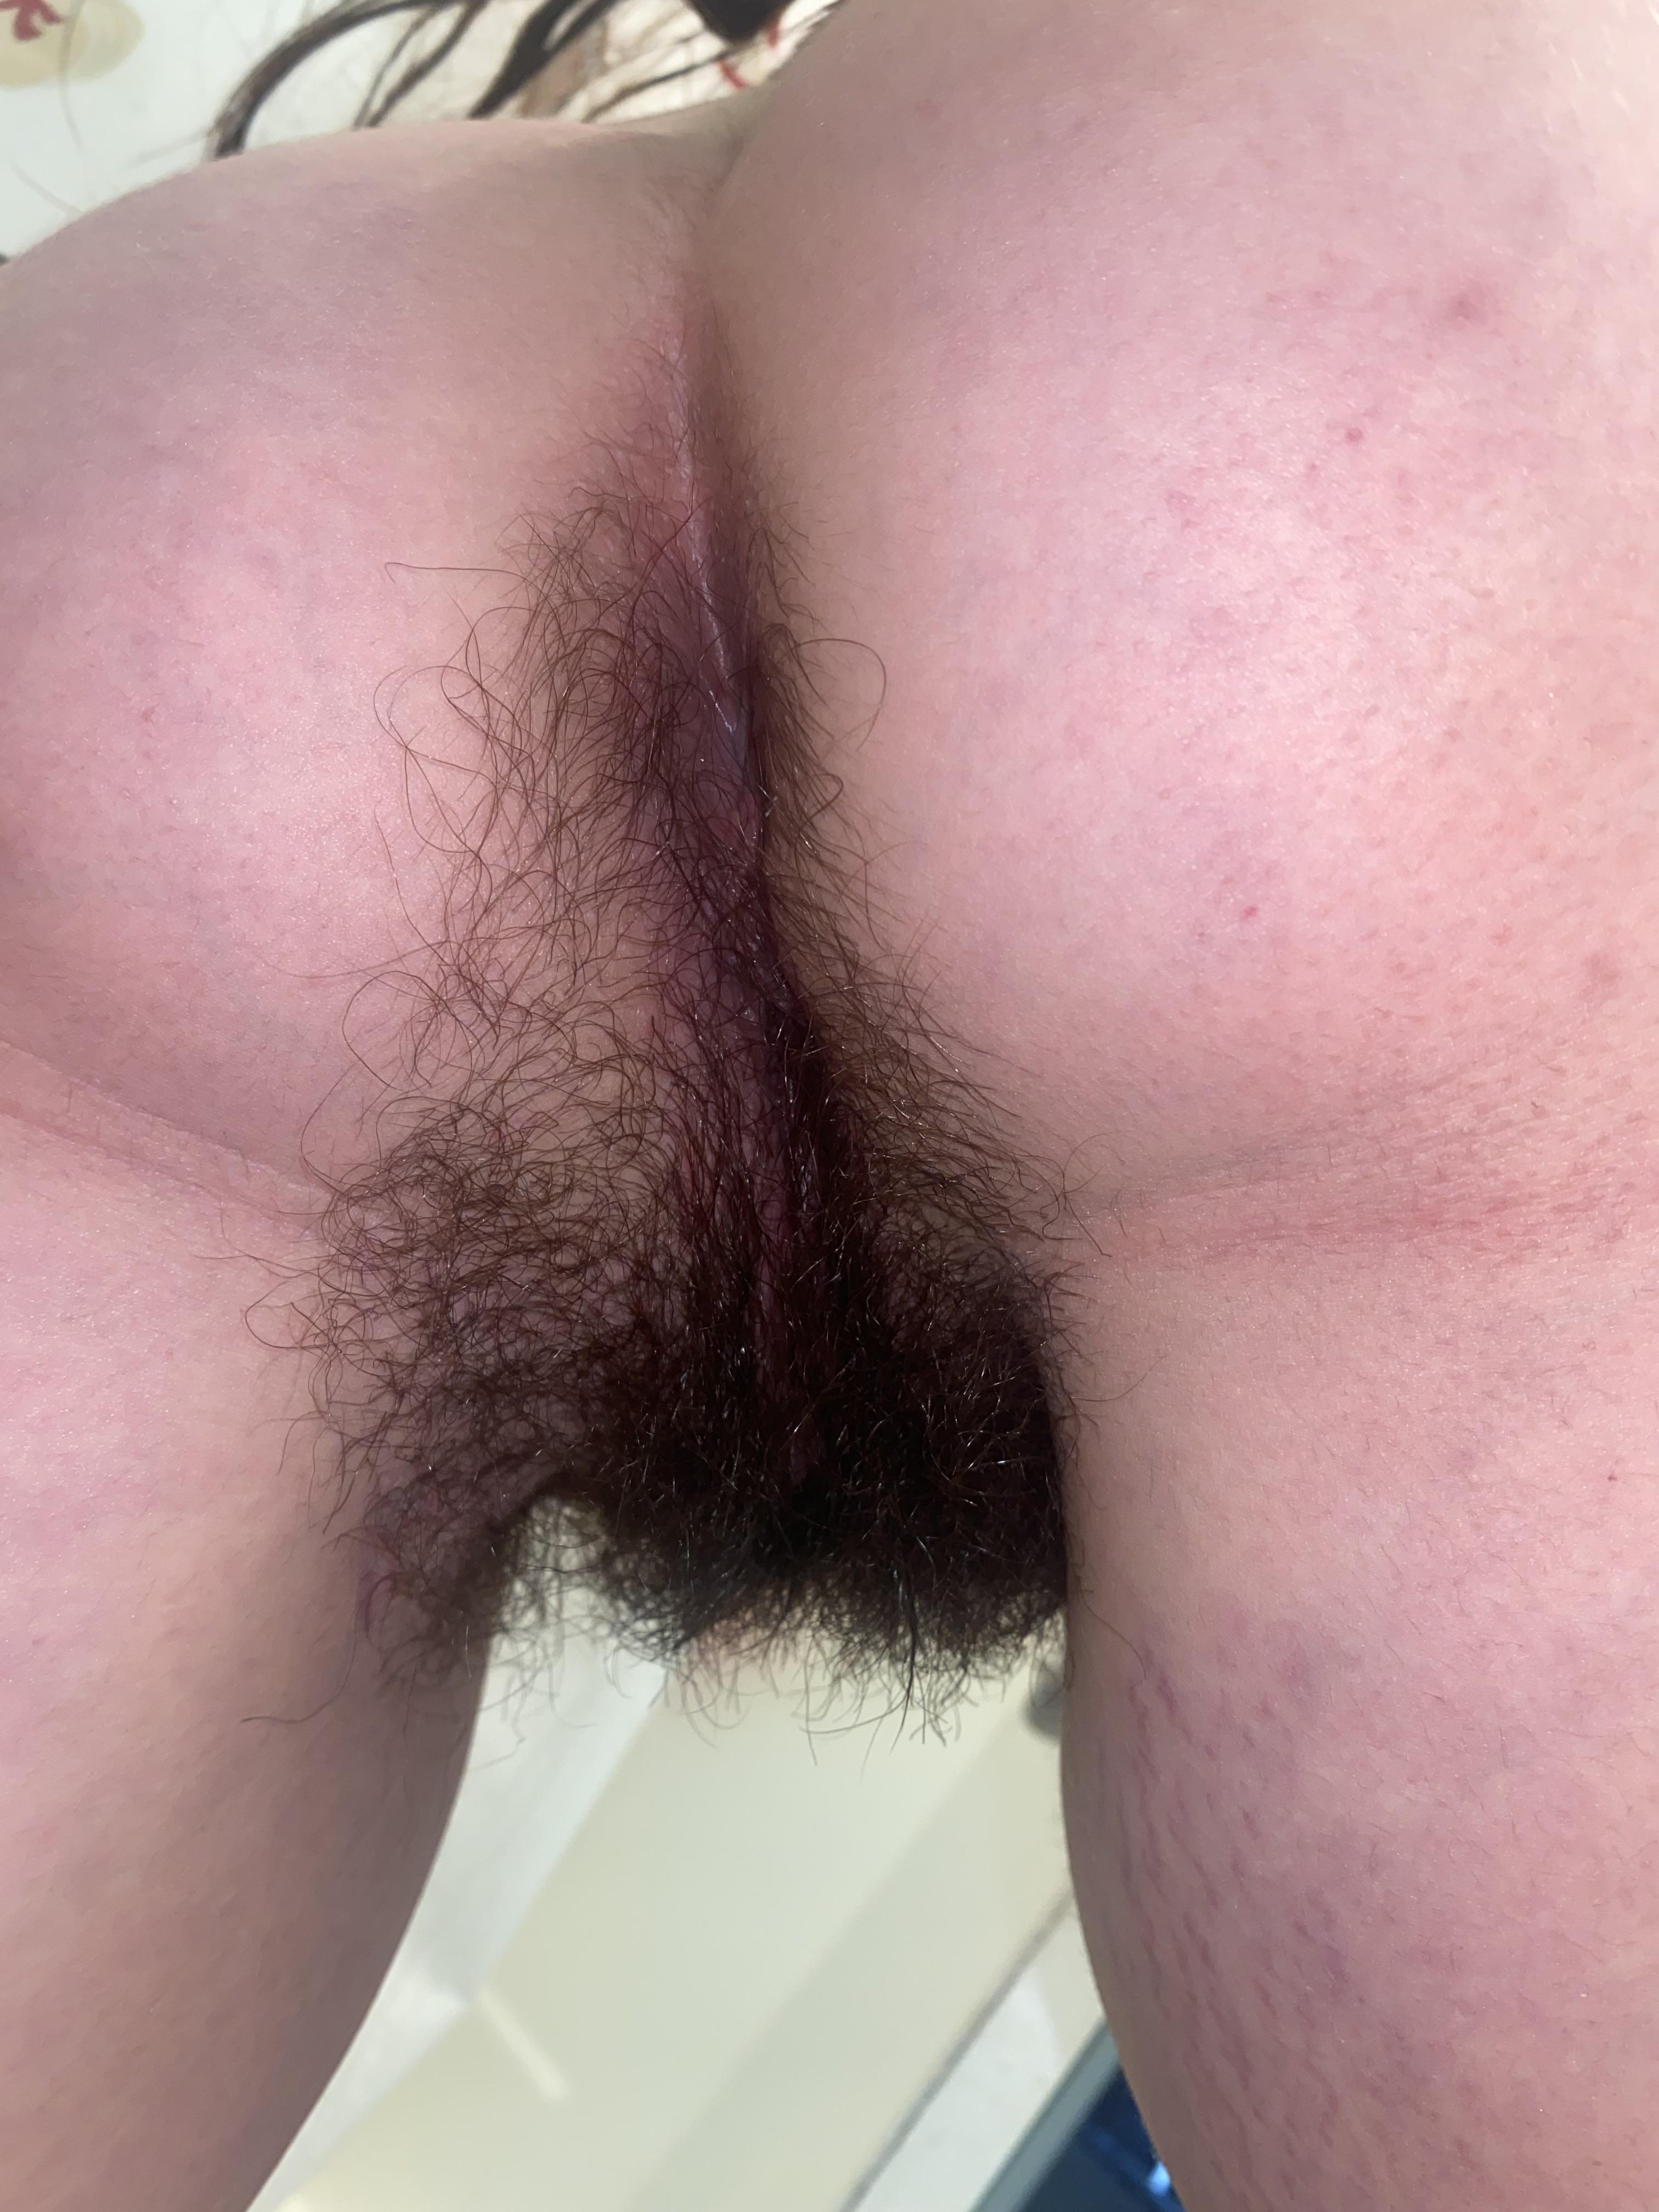 Hairy pussy from the back